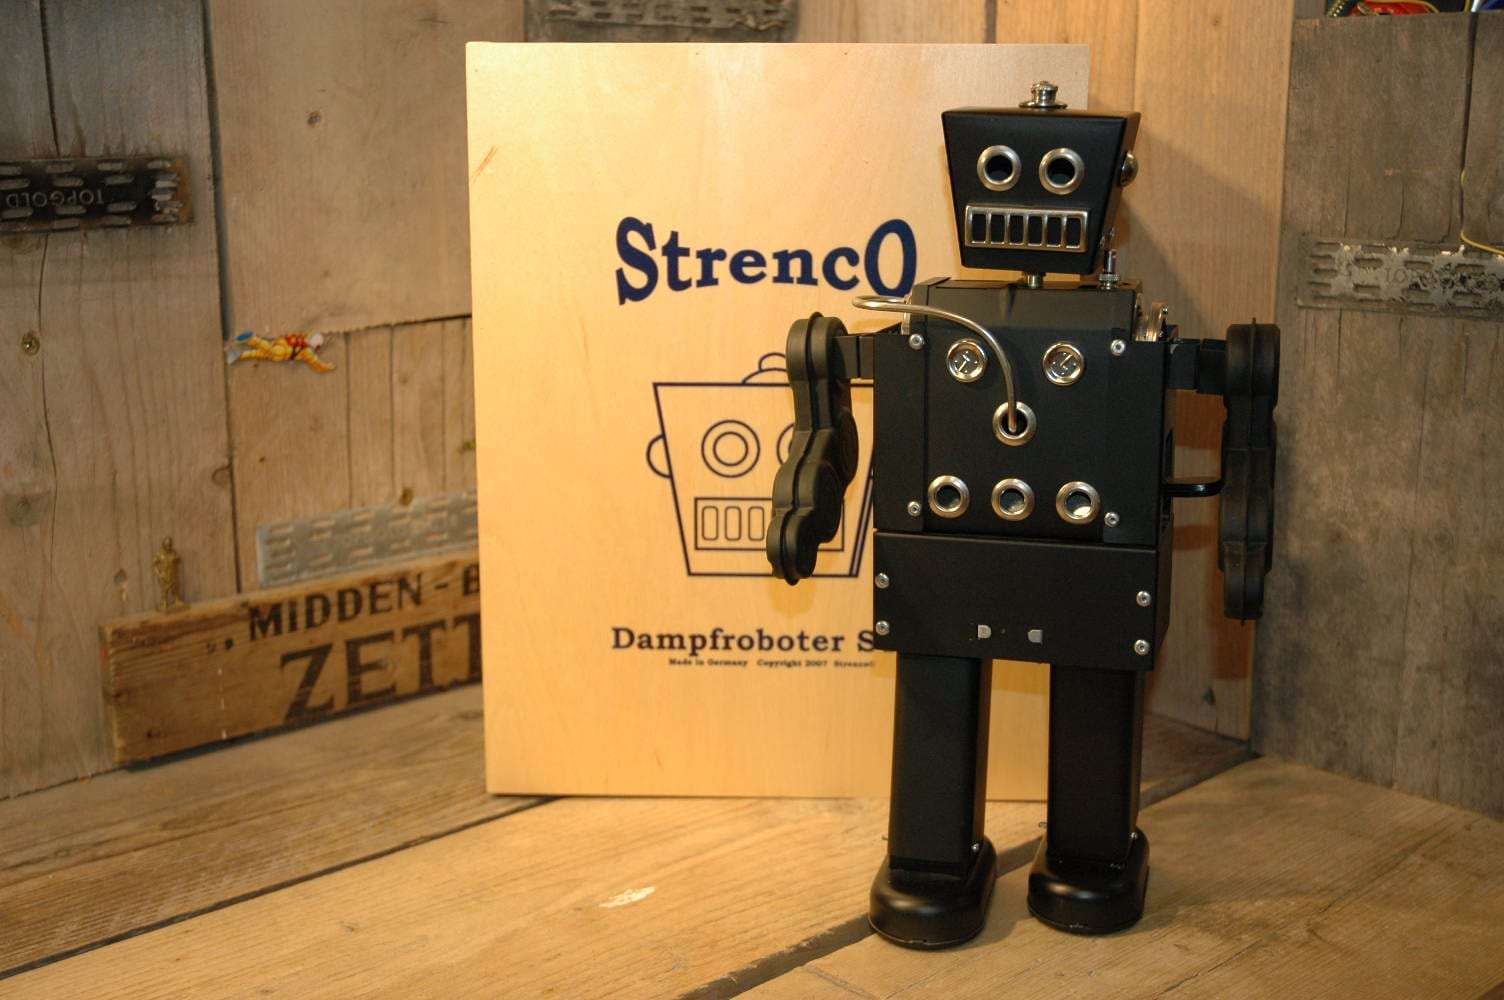 Strenco - DampfRoboter ST-2 Steambot